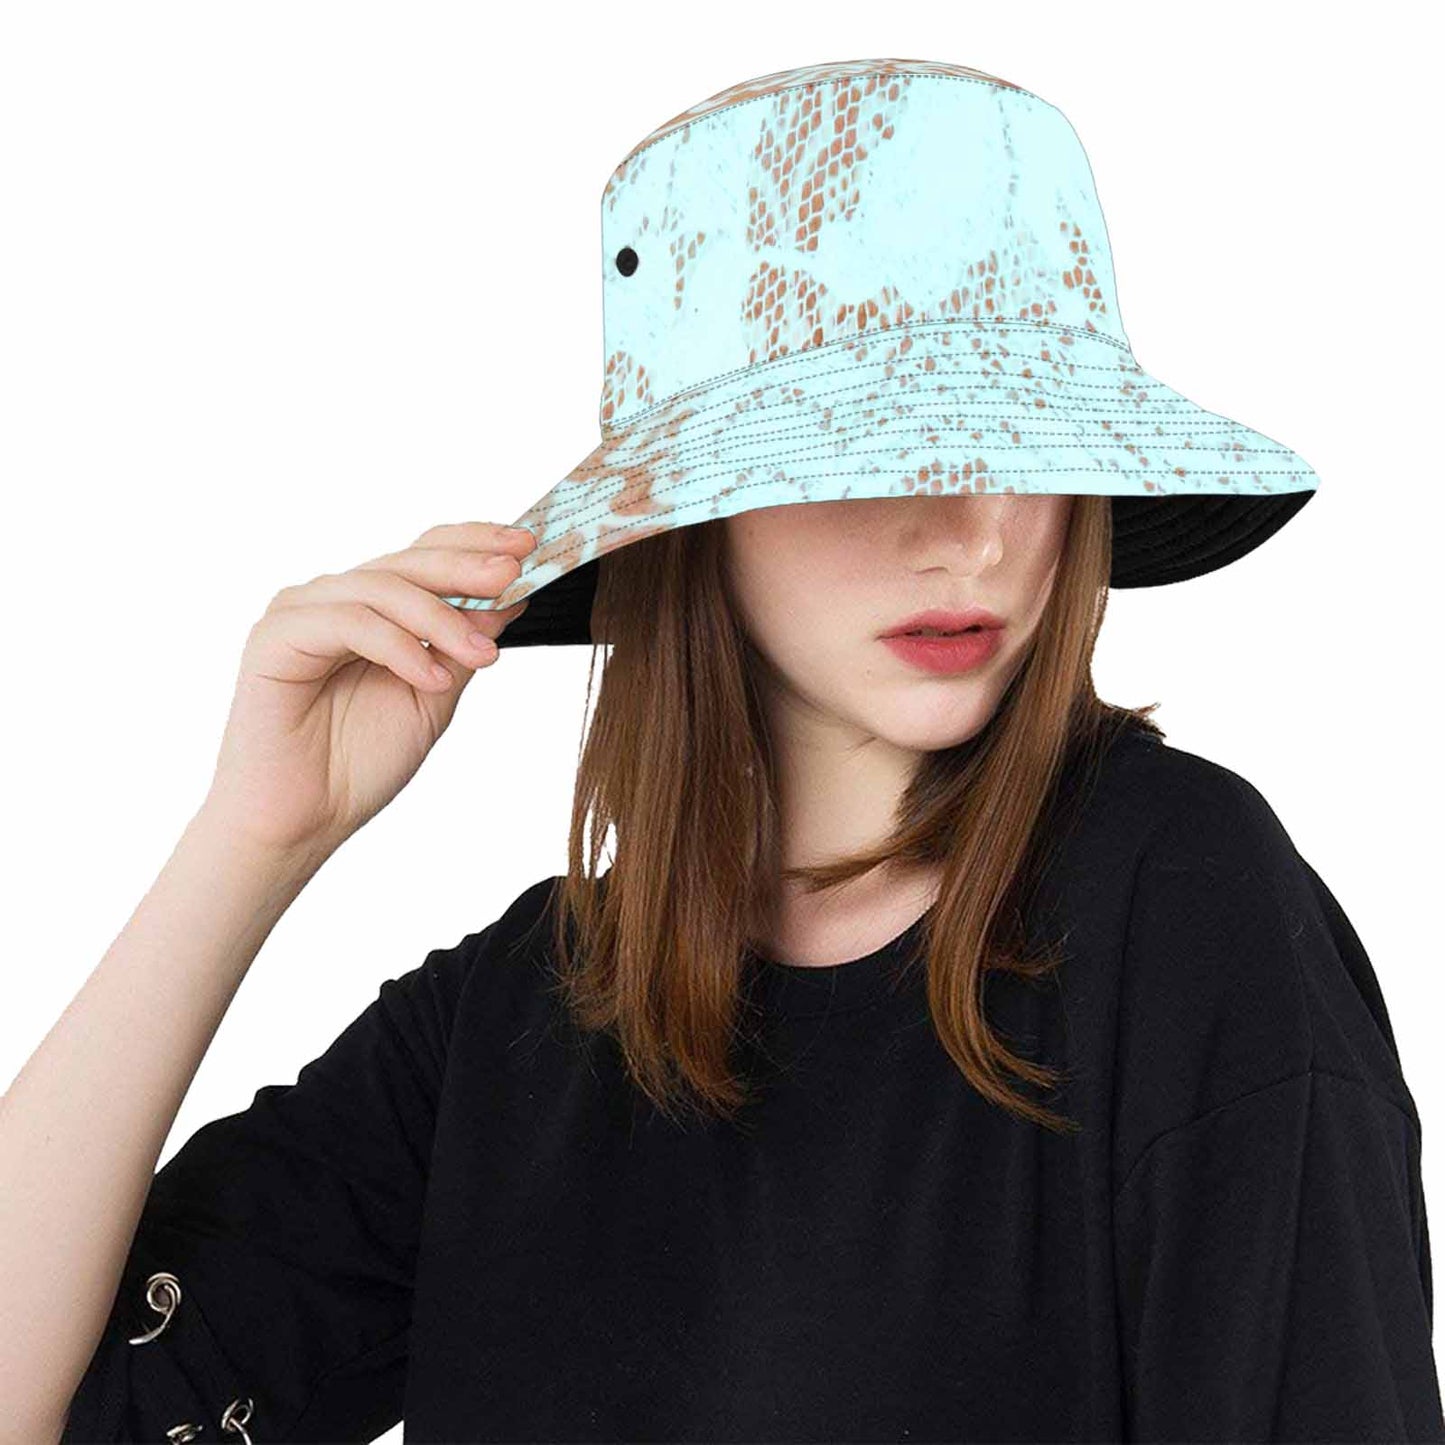 Victorian lace Bucket Hat, outdoors hat, design 23